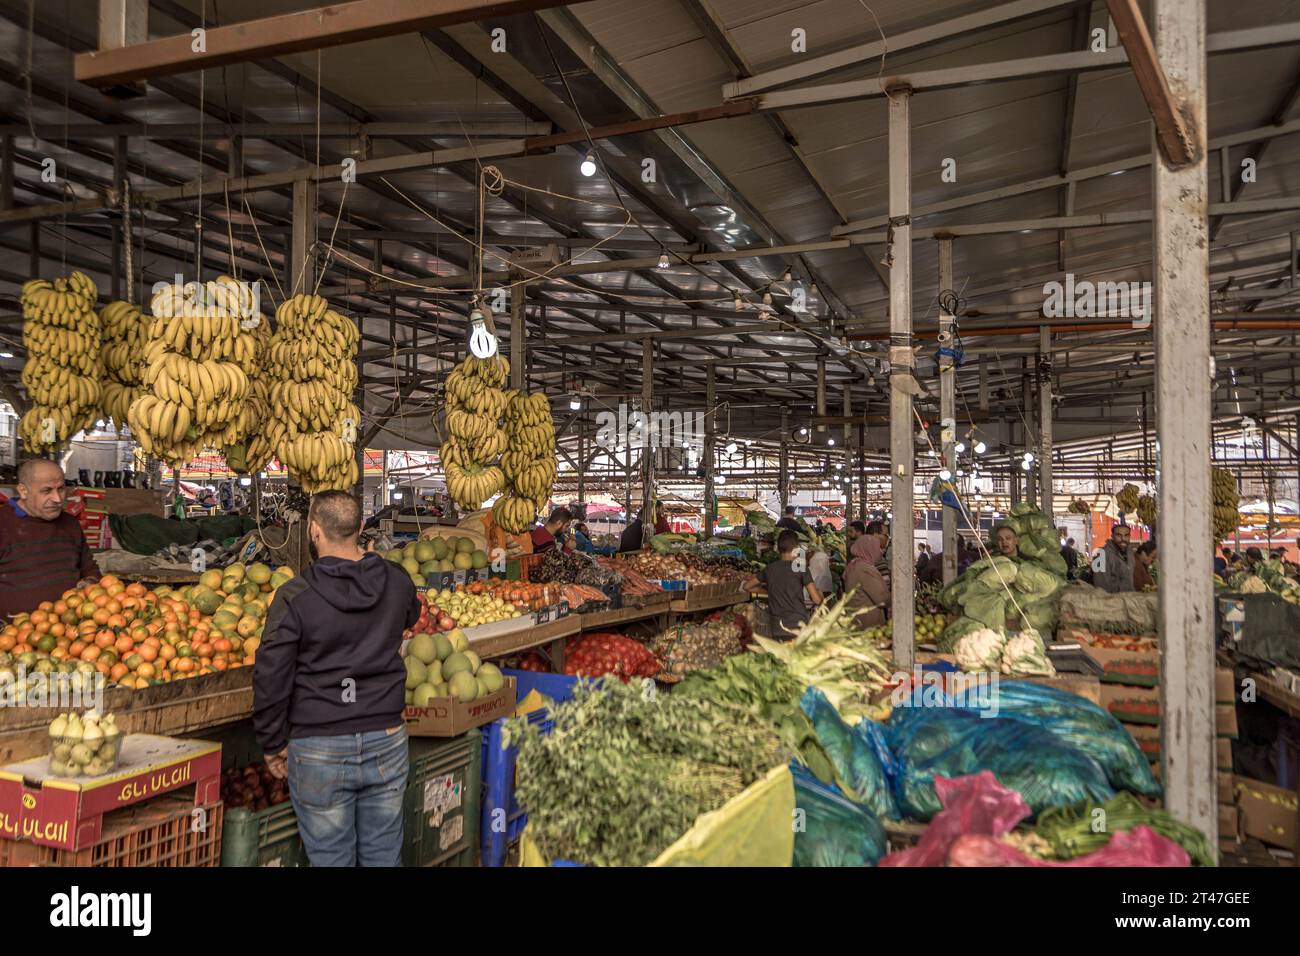 The people at food market with bananas, tomatoes, and other fruits and vegetables, at bazaar of Ramallah, the capital of Palestinian West Bank. Stock Photo